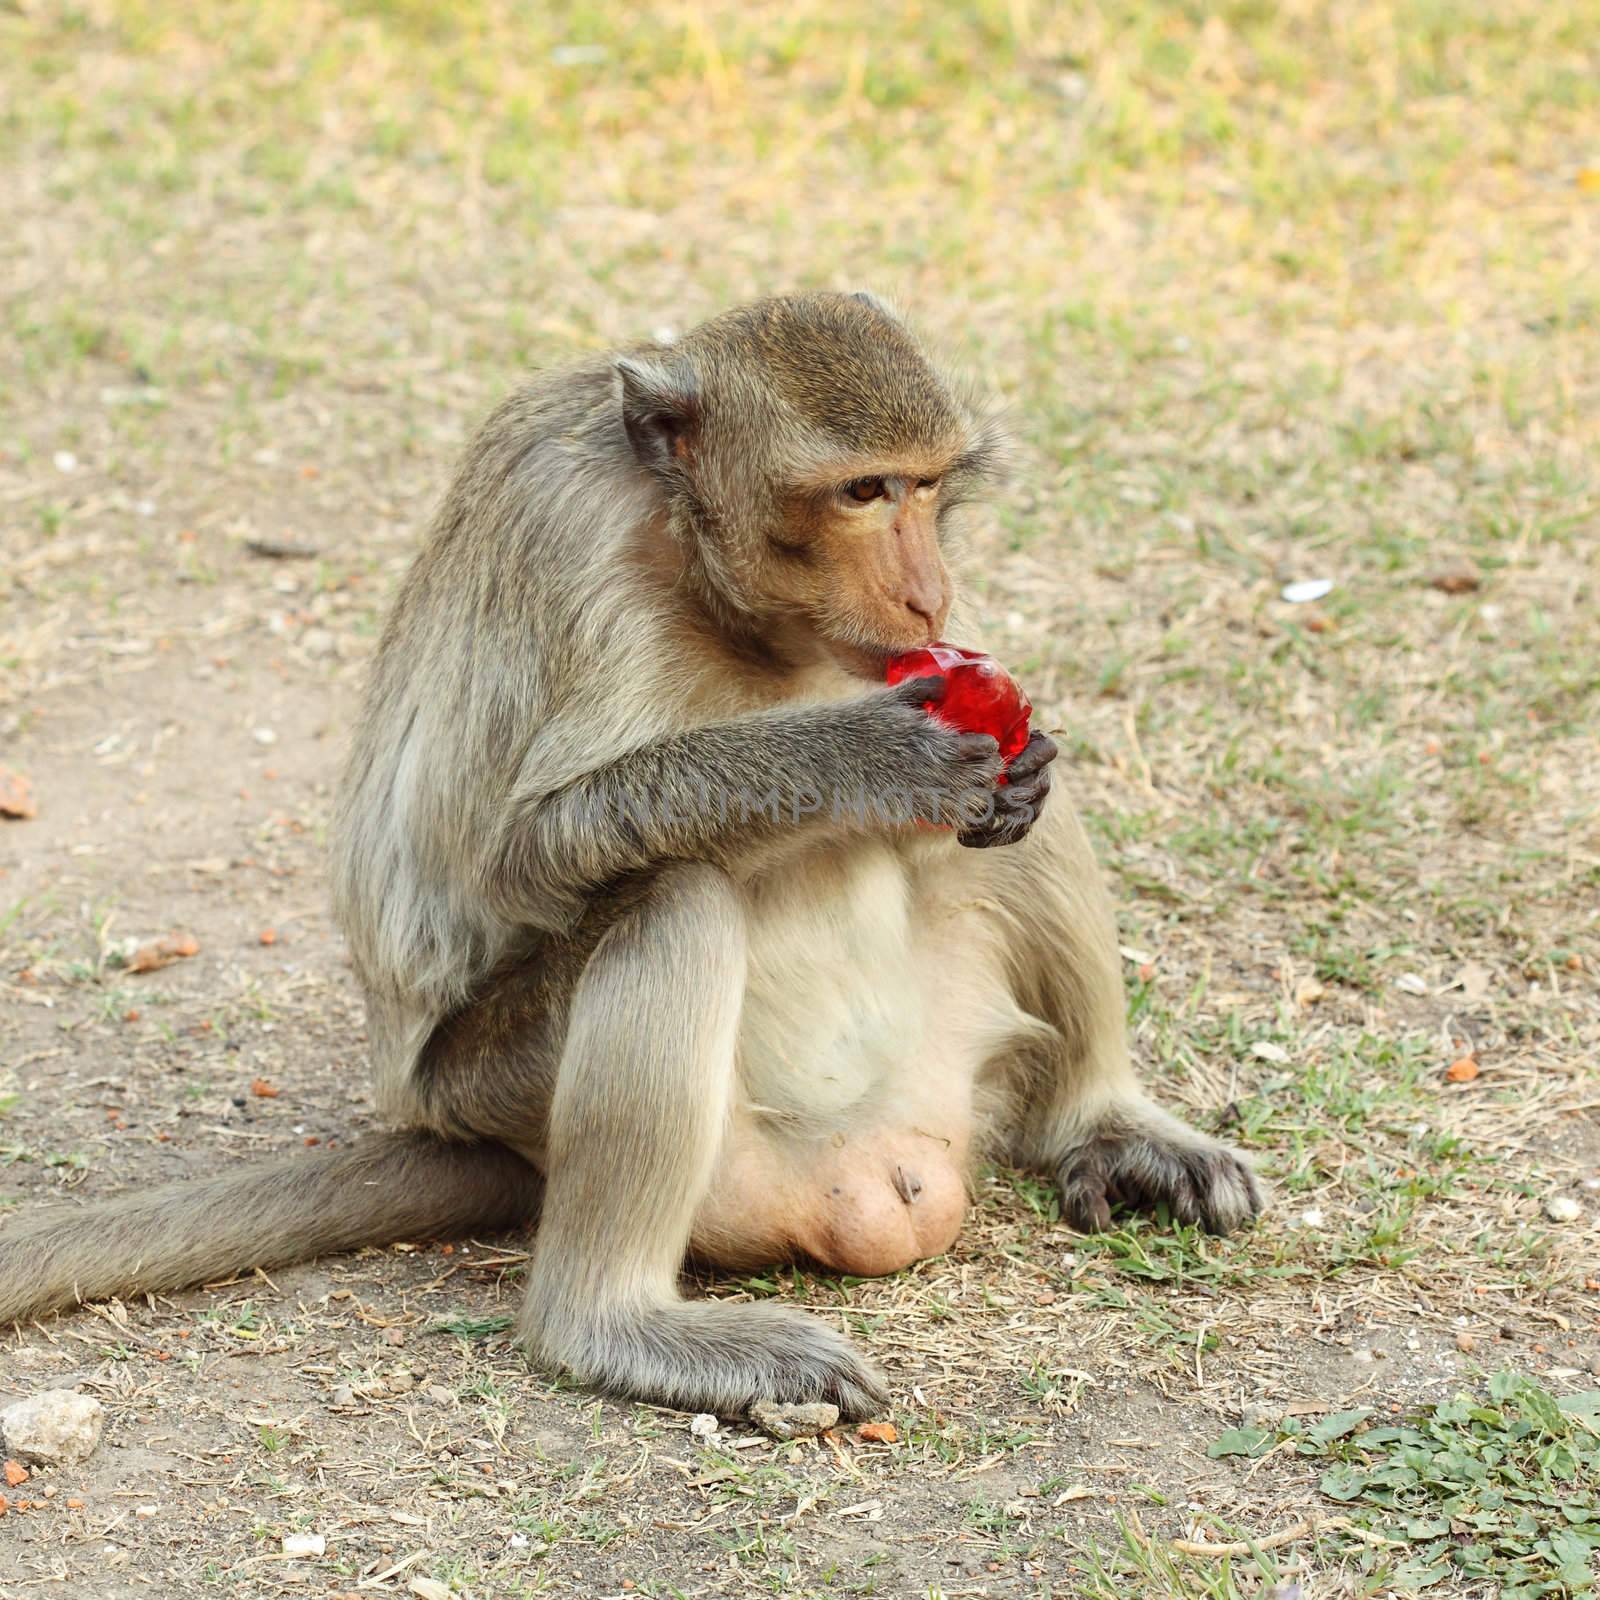 monkey eating a red water